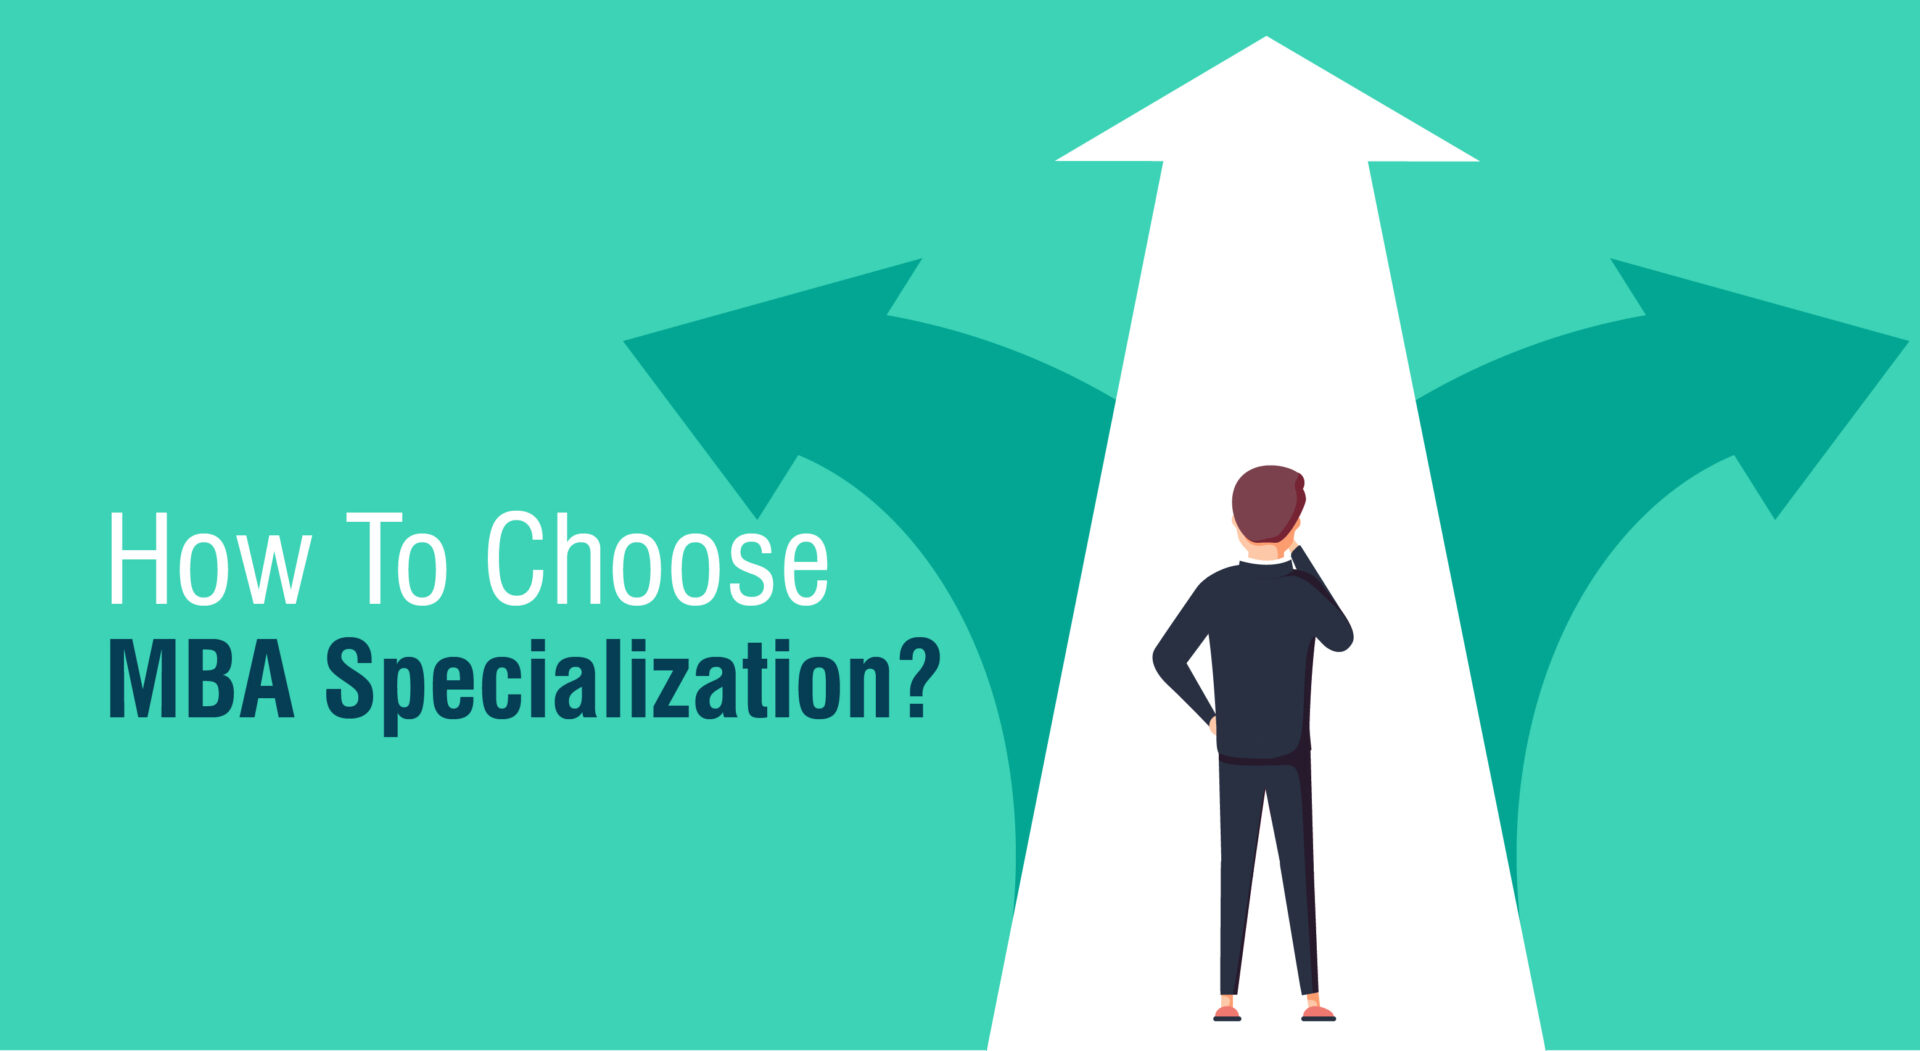 How to choose. MBA specialization. Успешный человек арт. Картинки по теме what channel to choose.